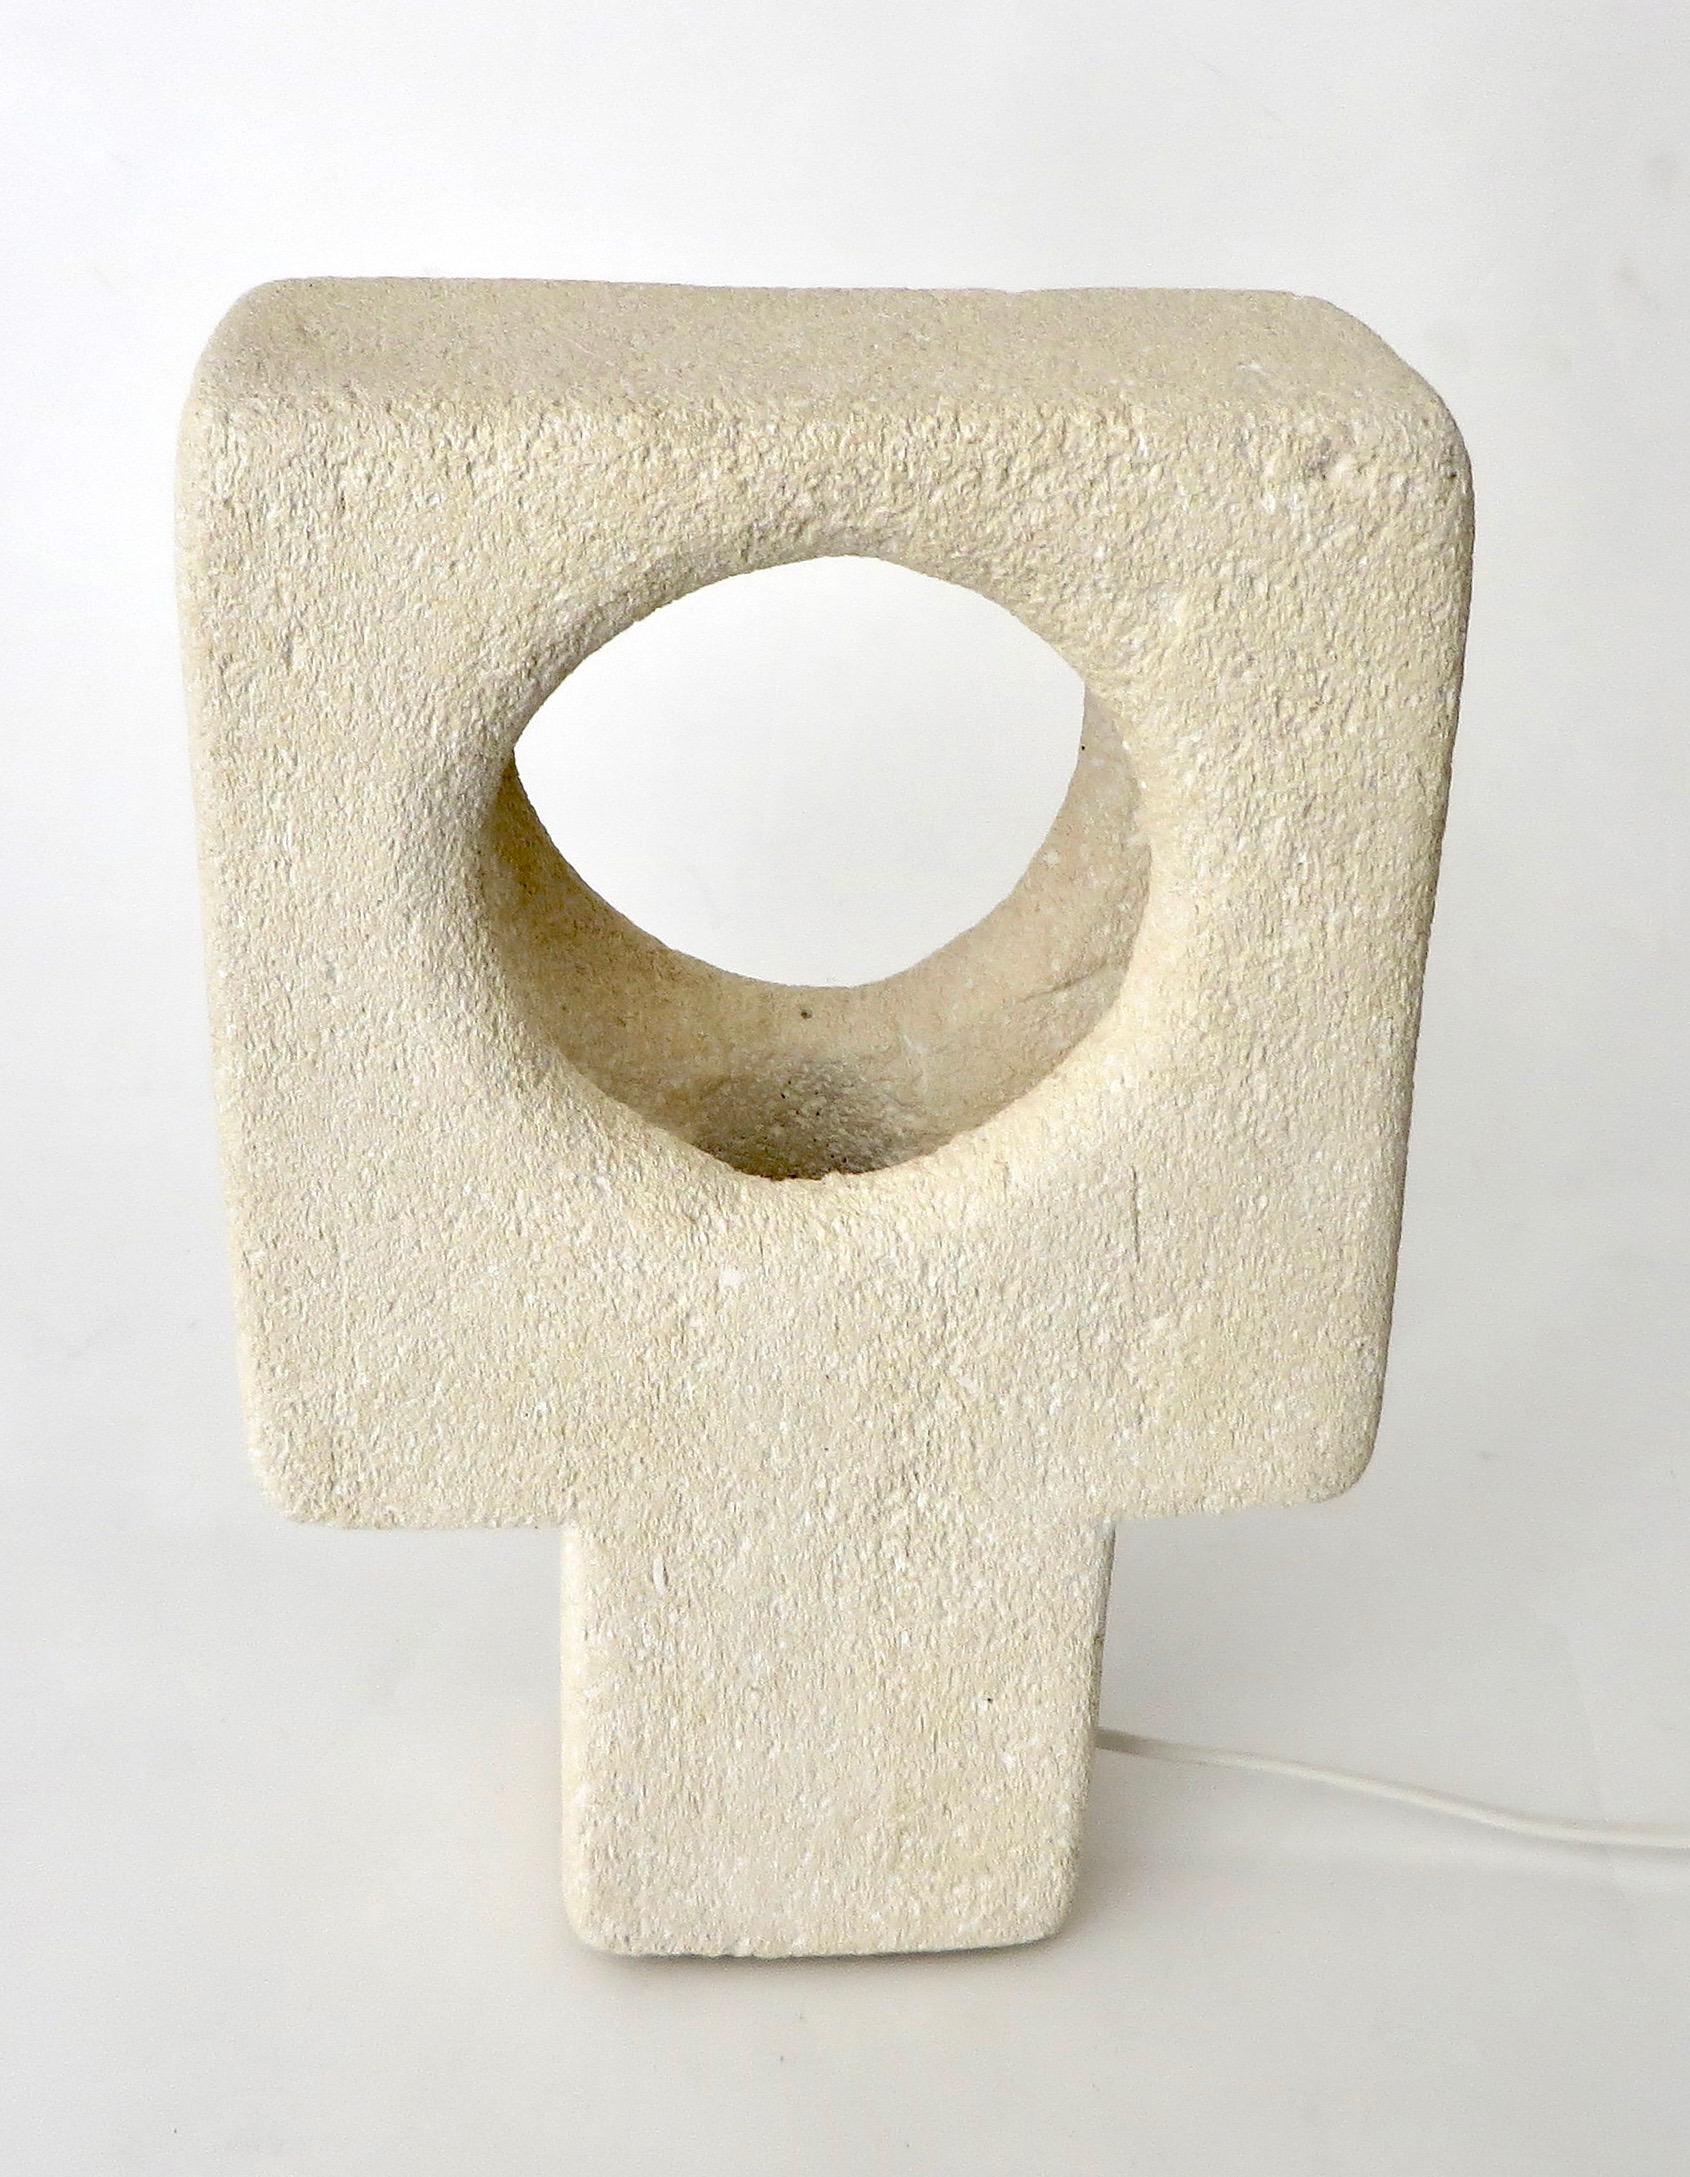 Hand-carved French volcanic luberon limestone or tuff stone lamp with a minimalist beton-brut architectural bearing. By Vallauris artist Albert Tormos, made circa 1970s. Incised signature 